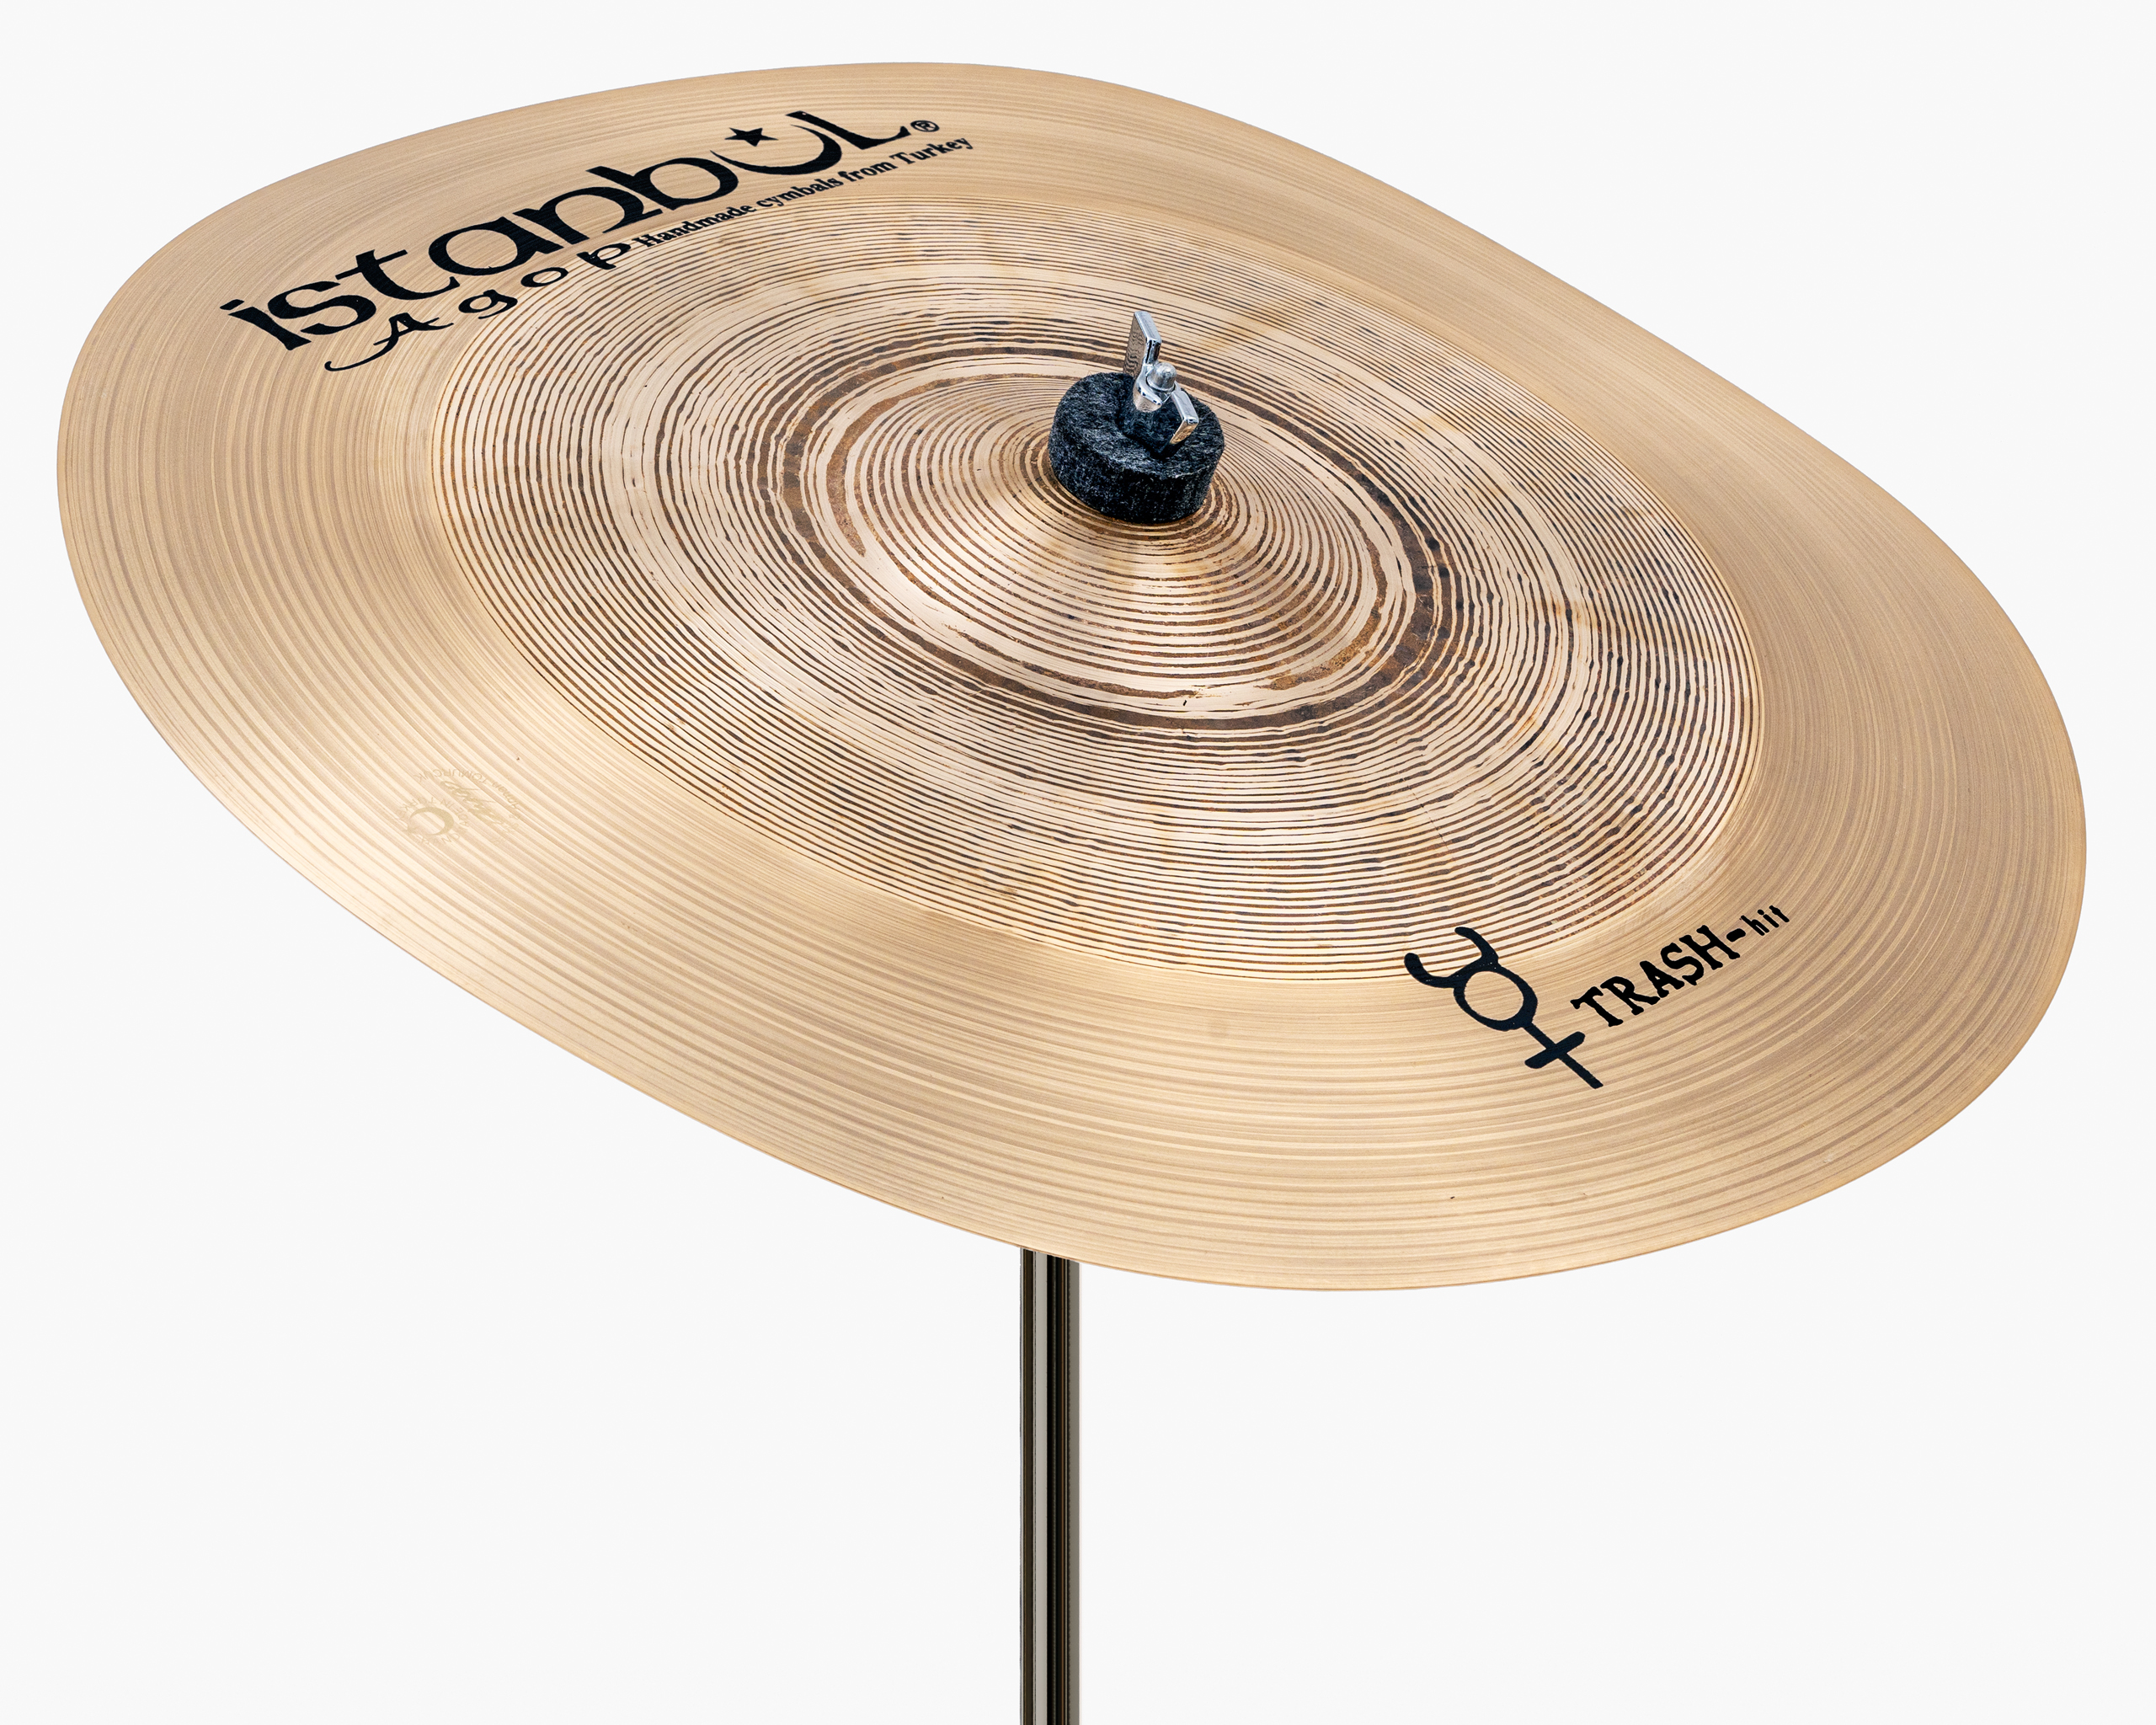 18″ Traditional Trash Hit – Istanbul Cymbals